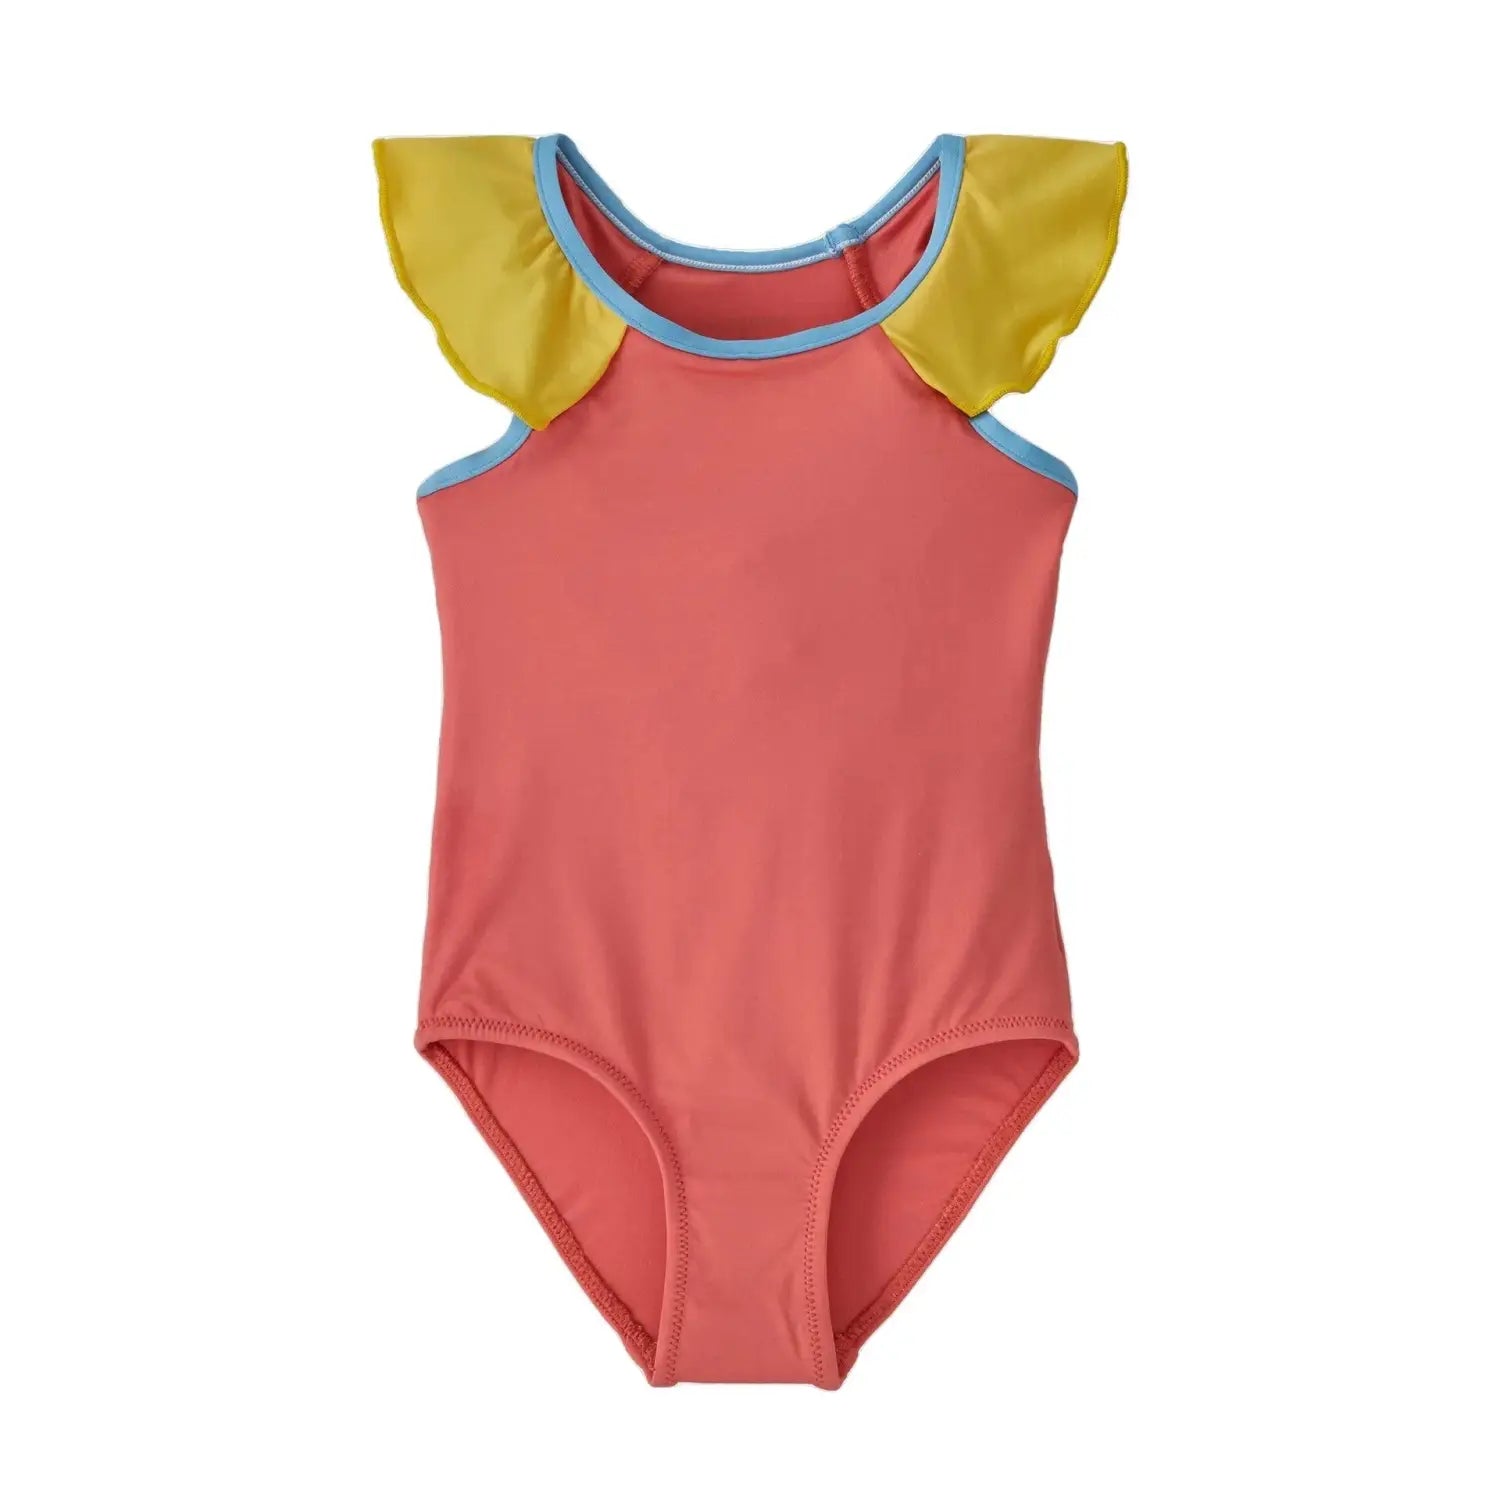 Patagonia Baby Water Sprout One-Piece Swimsuit, Coral, front view 